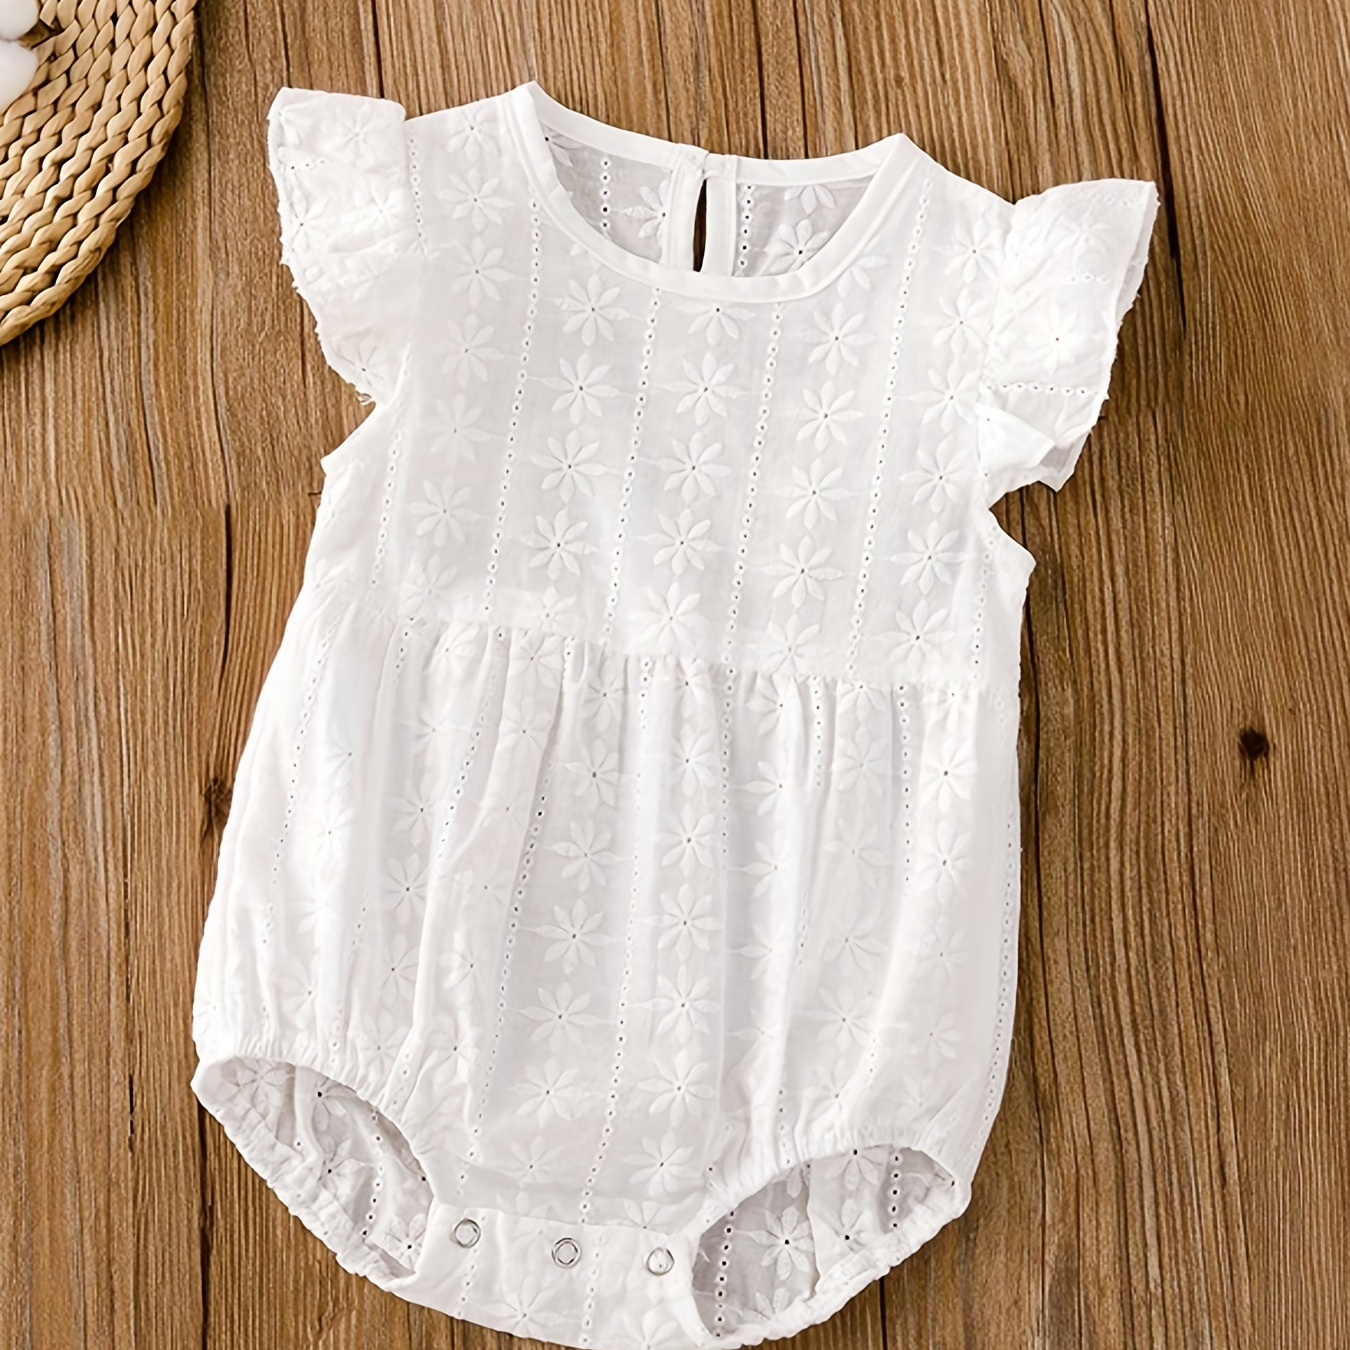 

Baby Girl Summer Thin & Comfy Cotton Romper - Flower Embroidered Flutter Sleeve Jumpsuit